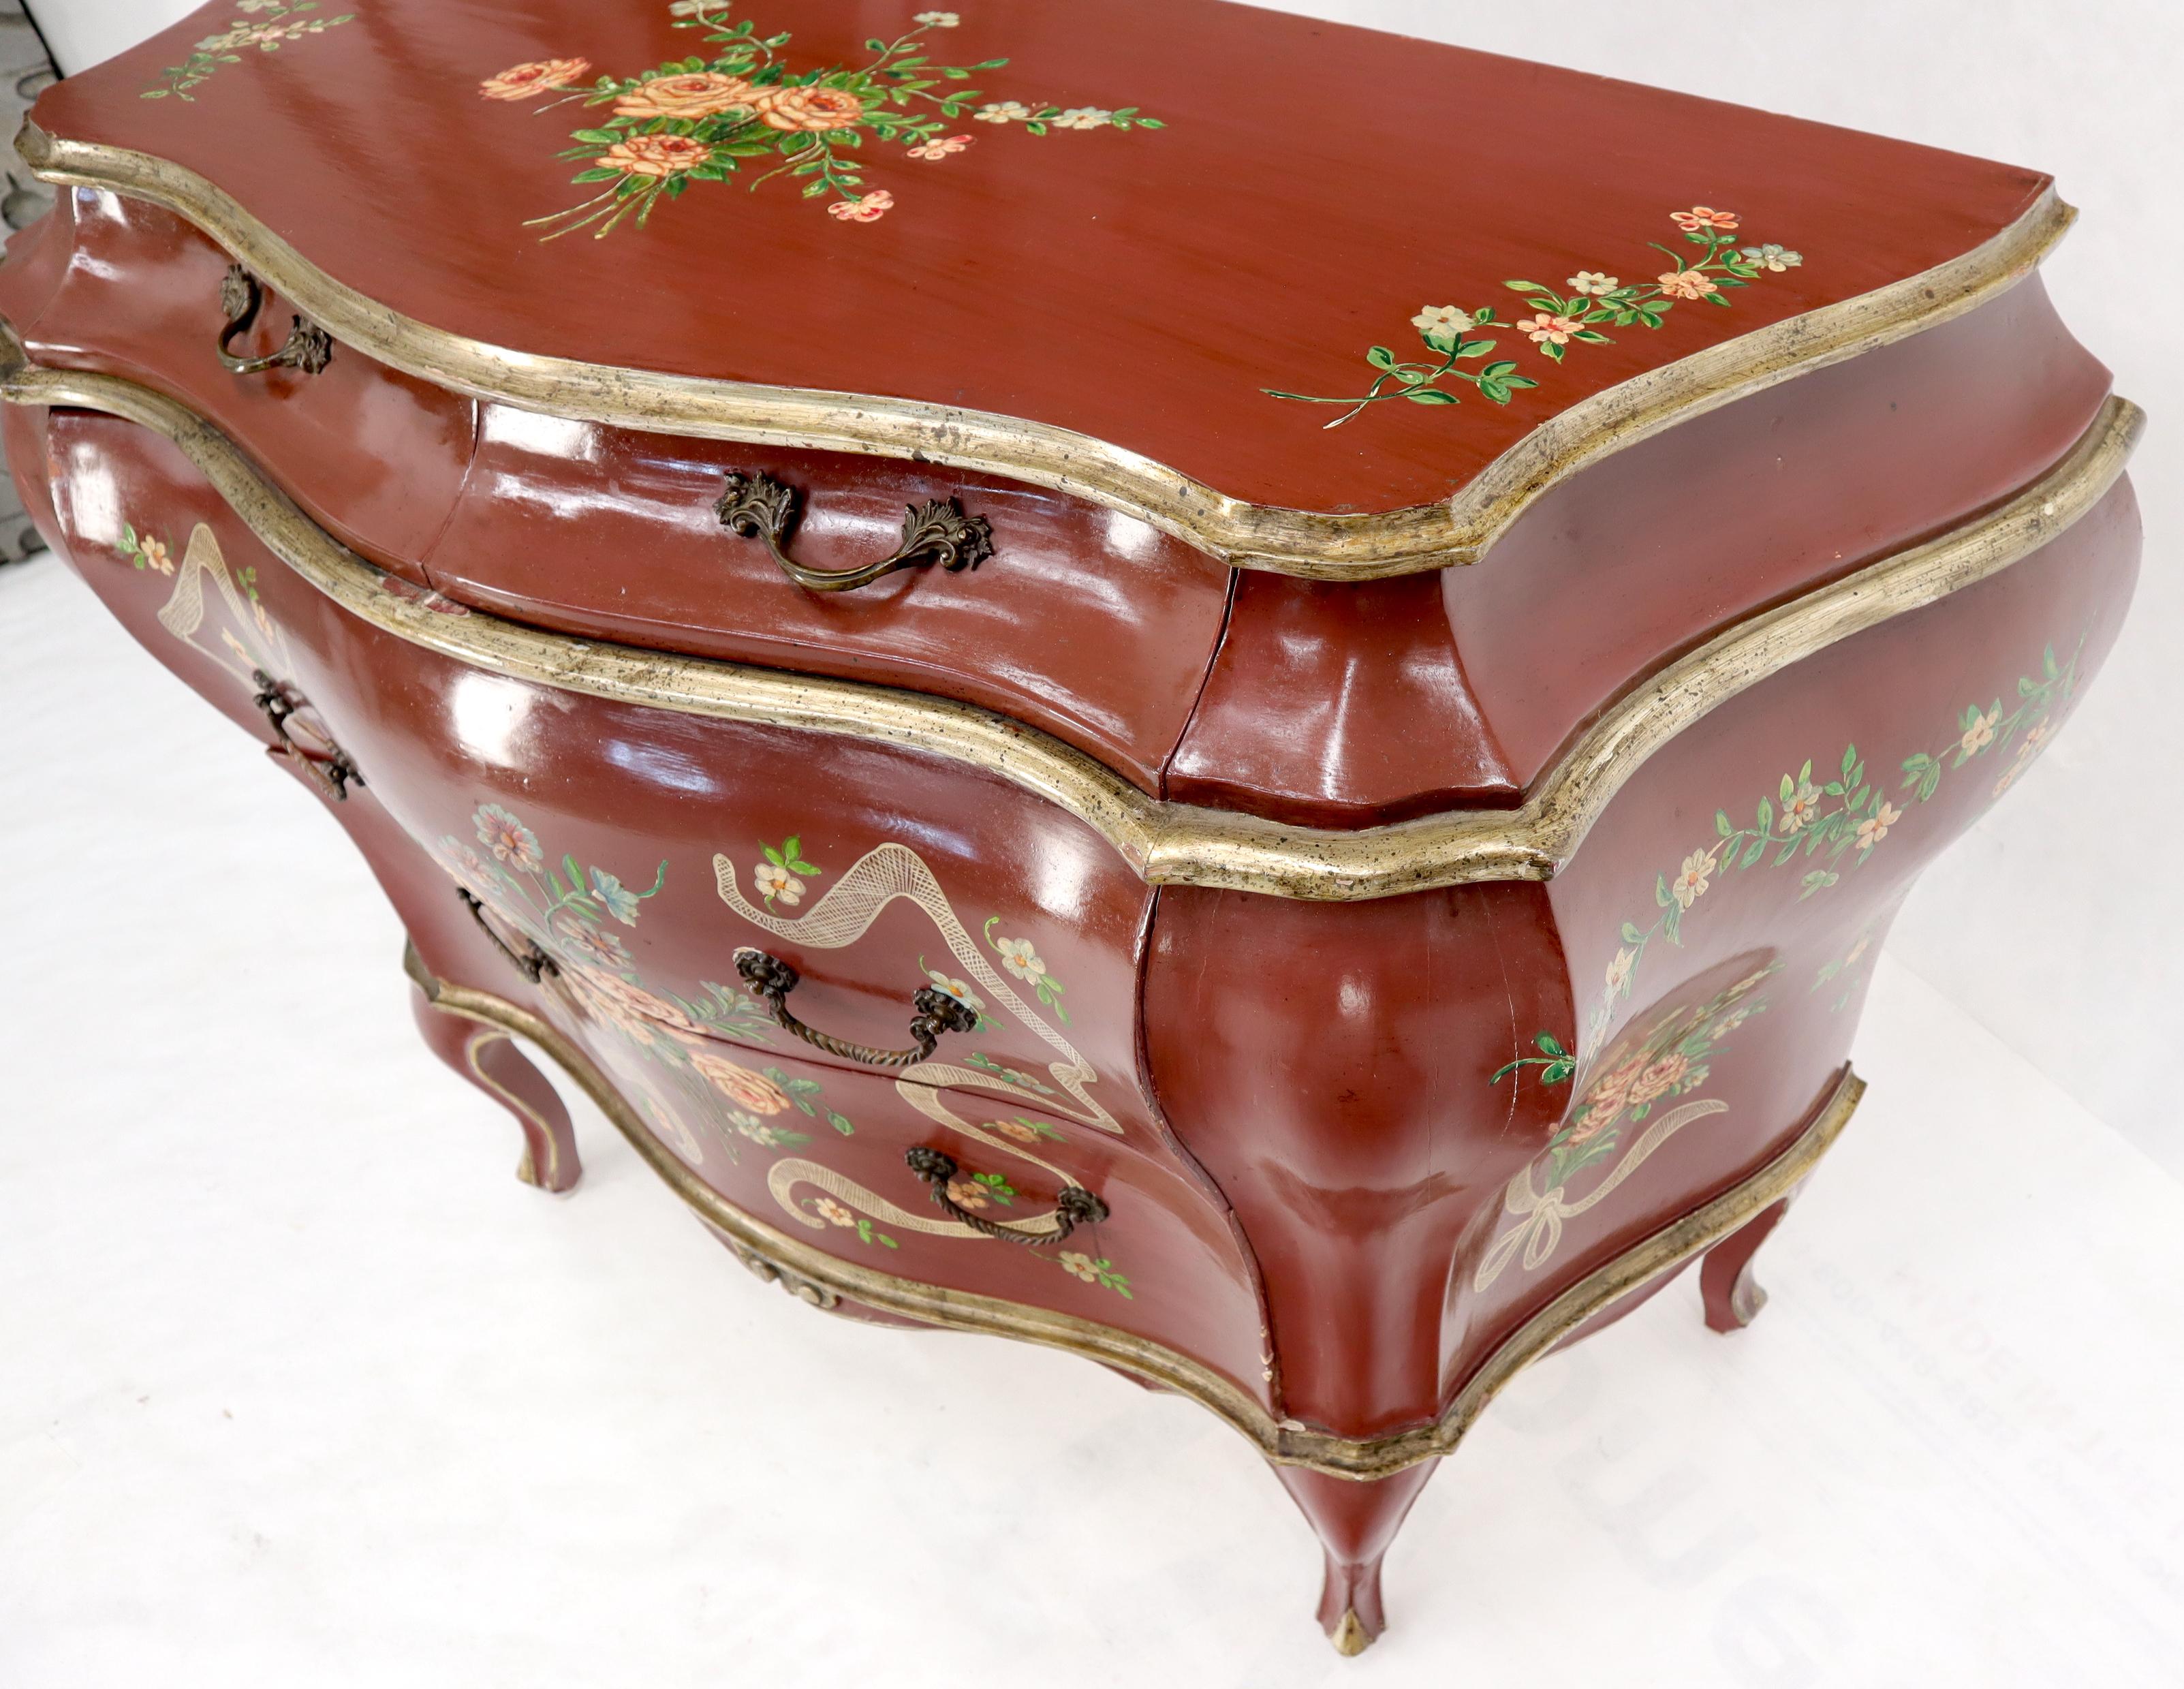 20th Century Red Lacquer Painted Bombay Dresser Chest of Drawers For Sale